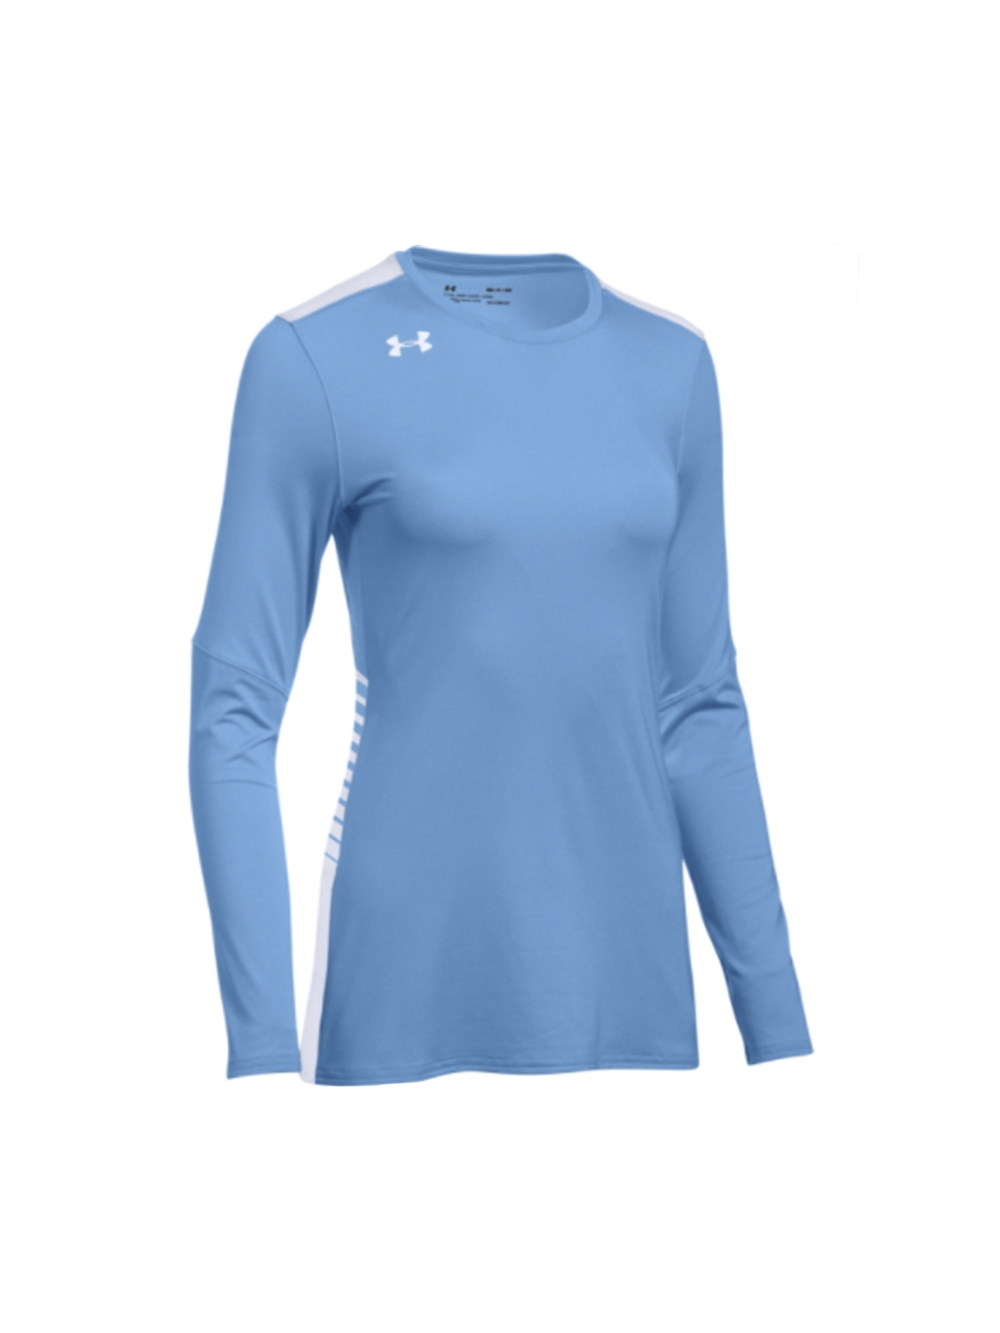 Under Armour Endless Power Long Sleeve Jersey - Columbia Blue